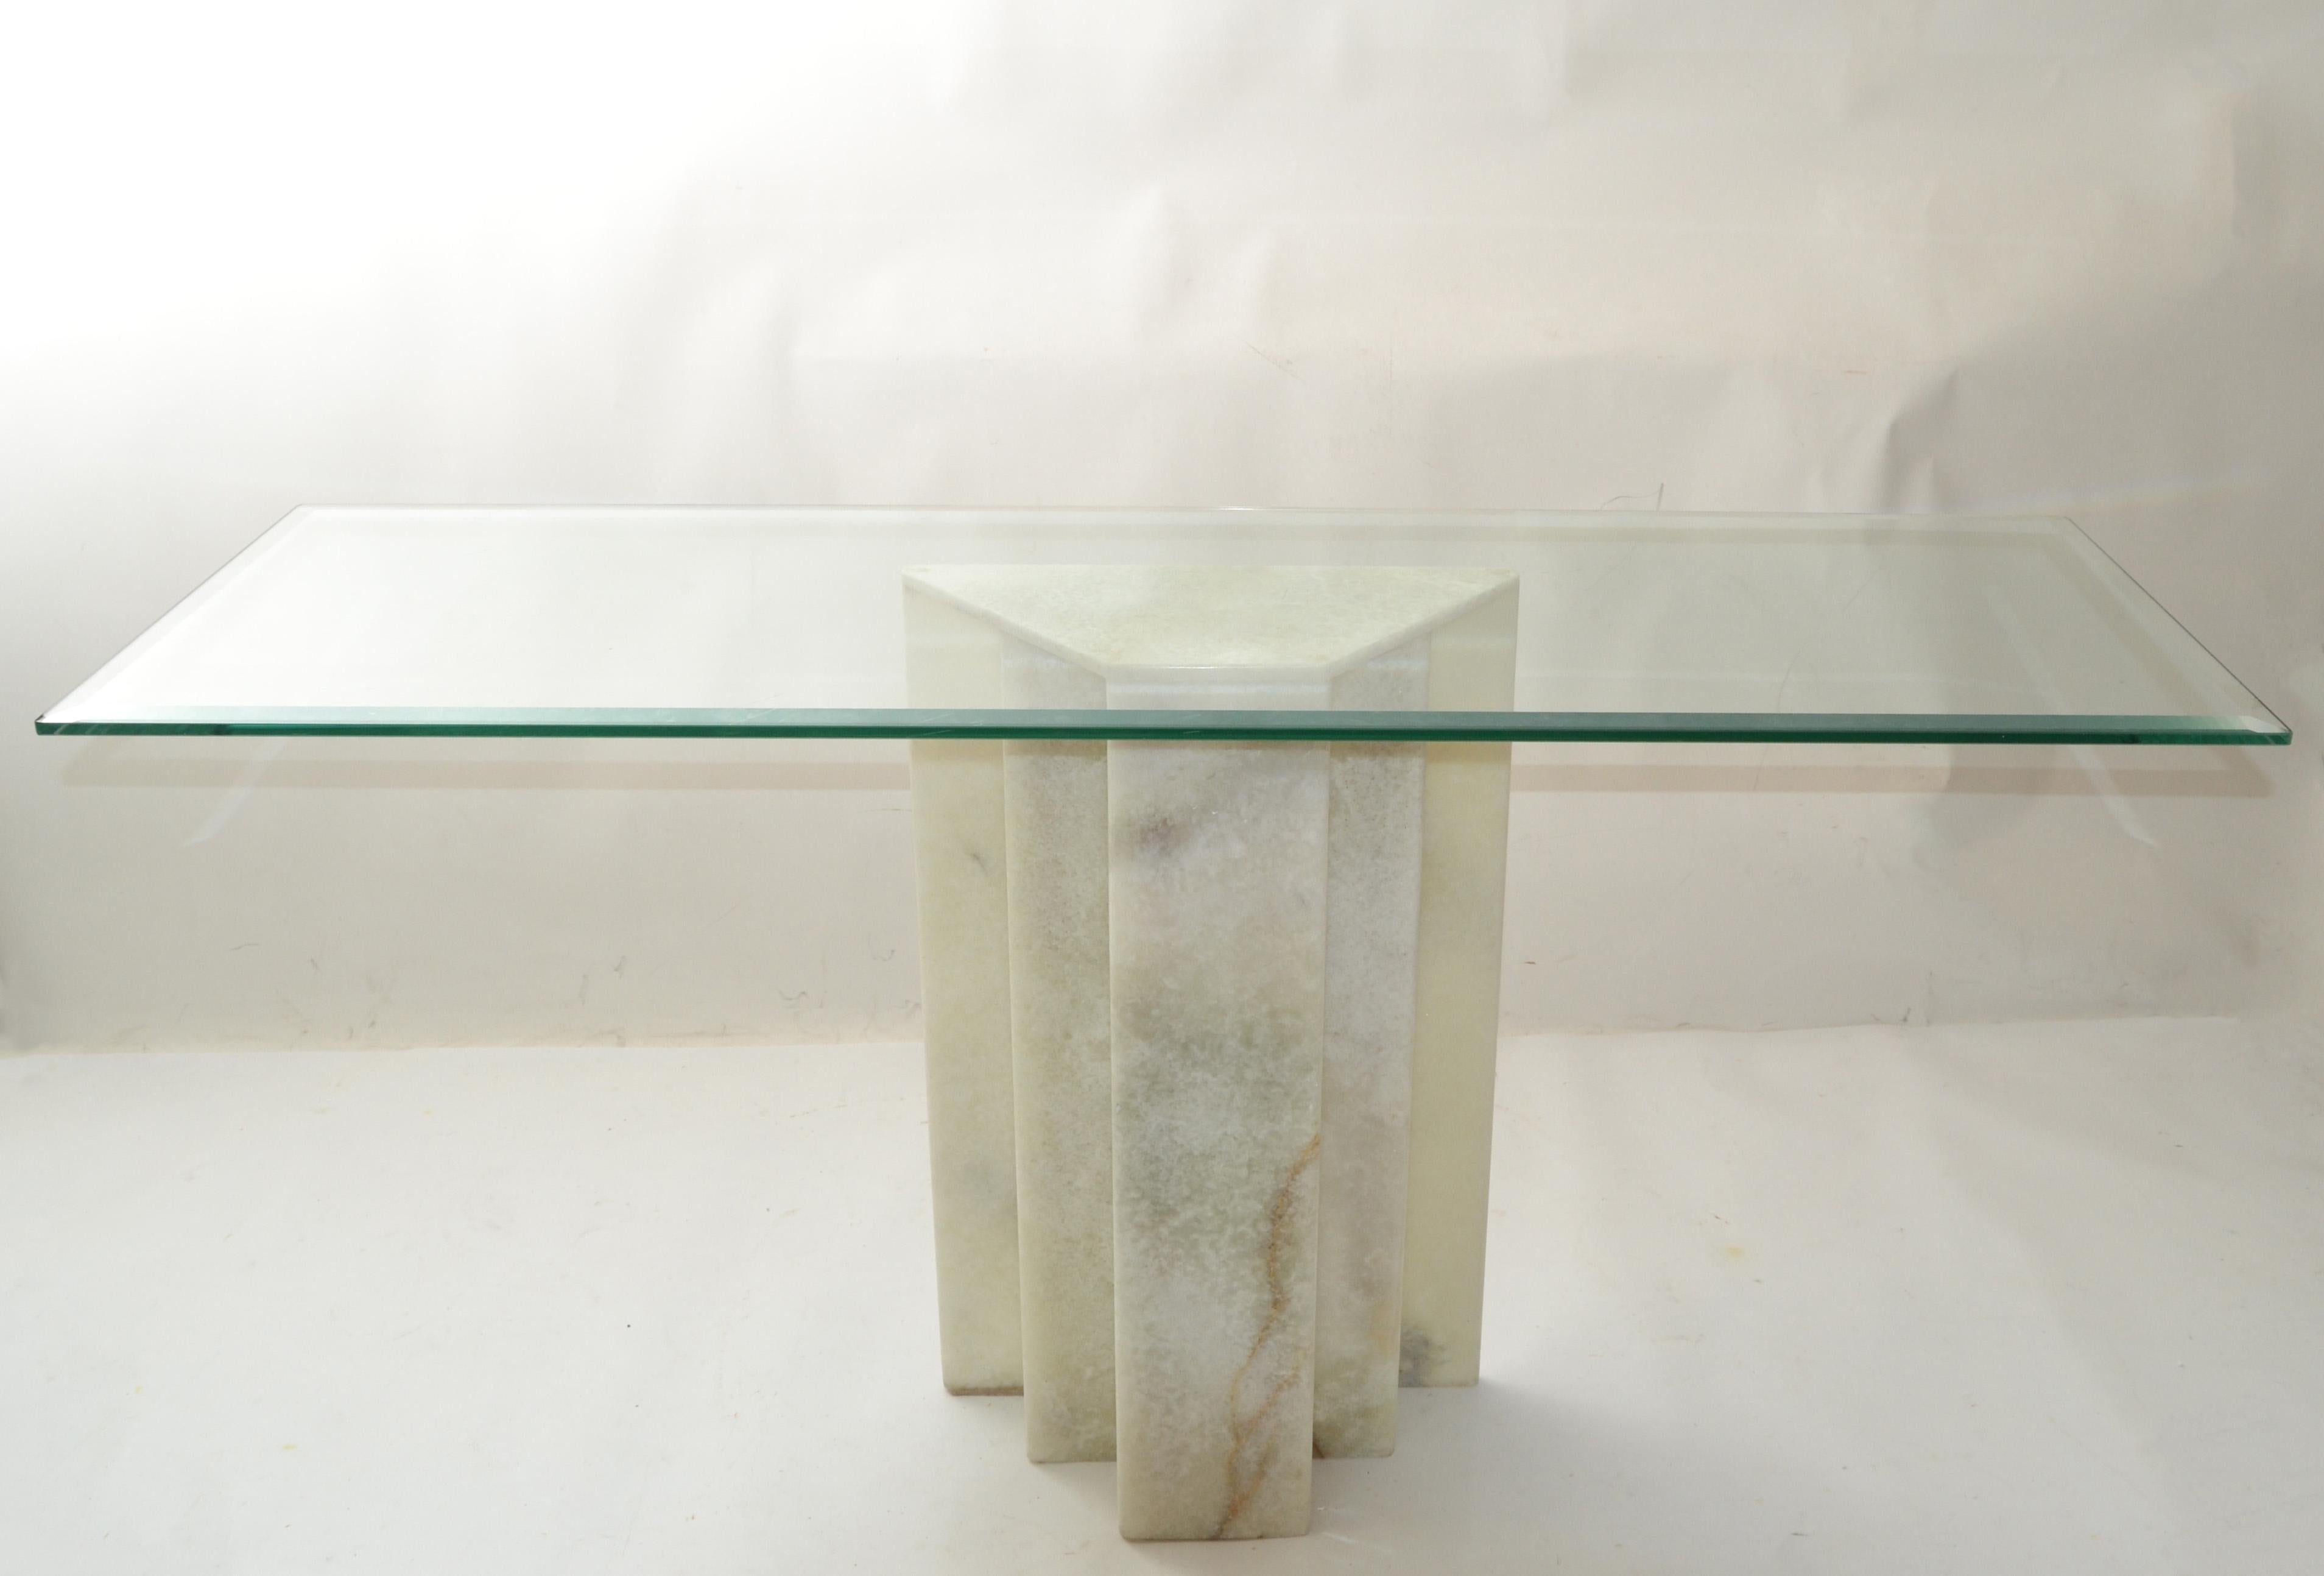 Stately white Alabaster skyscraper shaped console table base, Pedestal, Column from the Art Deco Period.
Note: No Glass Top, we offer just the base.
Glass used for the pictures: 56 x 18 inches. 
Height with Glass Top measures: 29 inches.
The